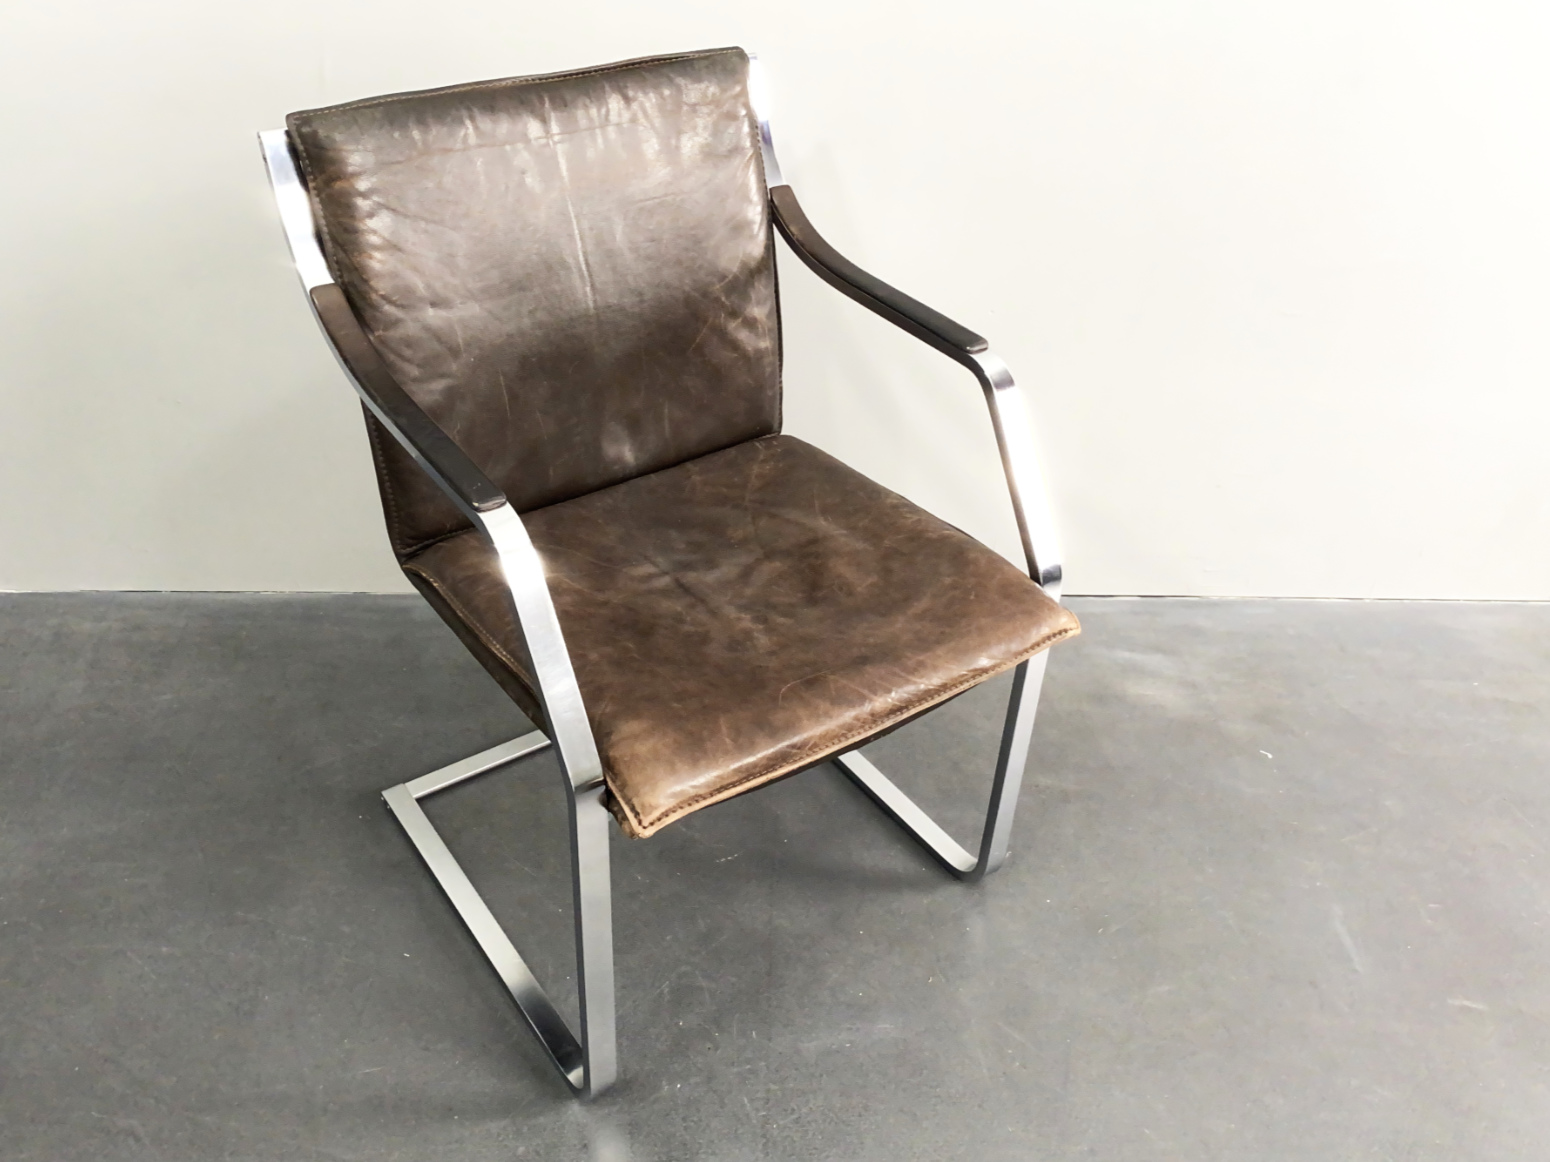 Conference Chair, Cantilever Chair, Armchair, Leather, Stainless Steel, by Rudolf Glatzel for Walter Knoll, Drei Punkt Art Collection, Model Pattino, Germany, 1970s